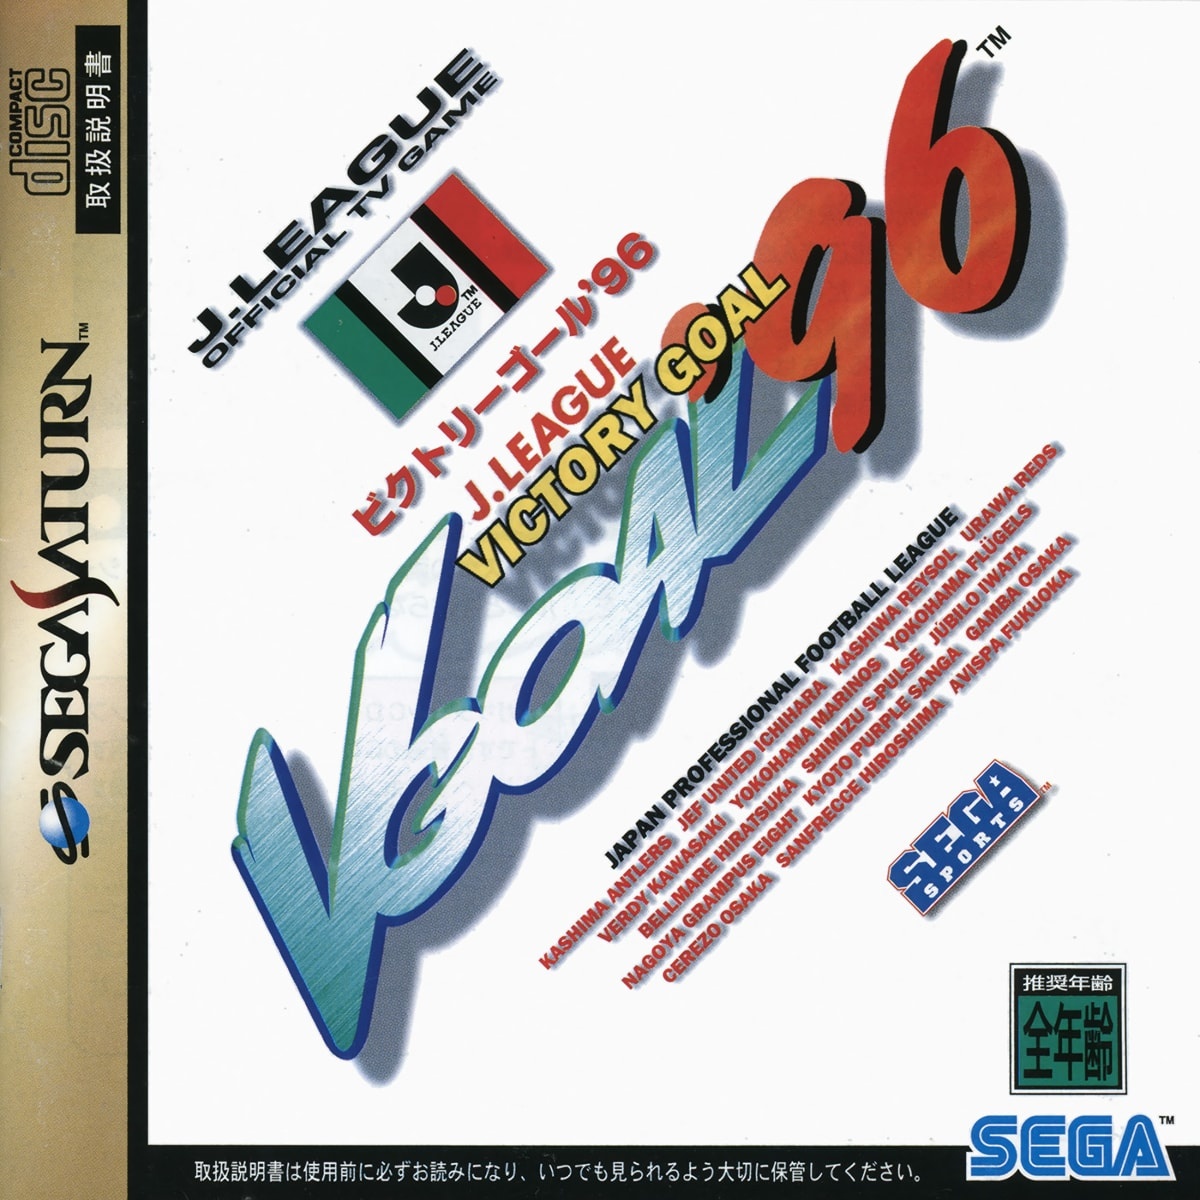 Victory Goal 96 cover